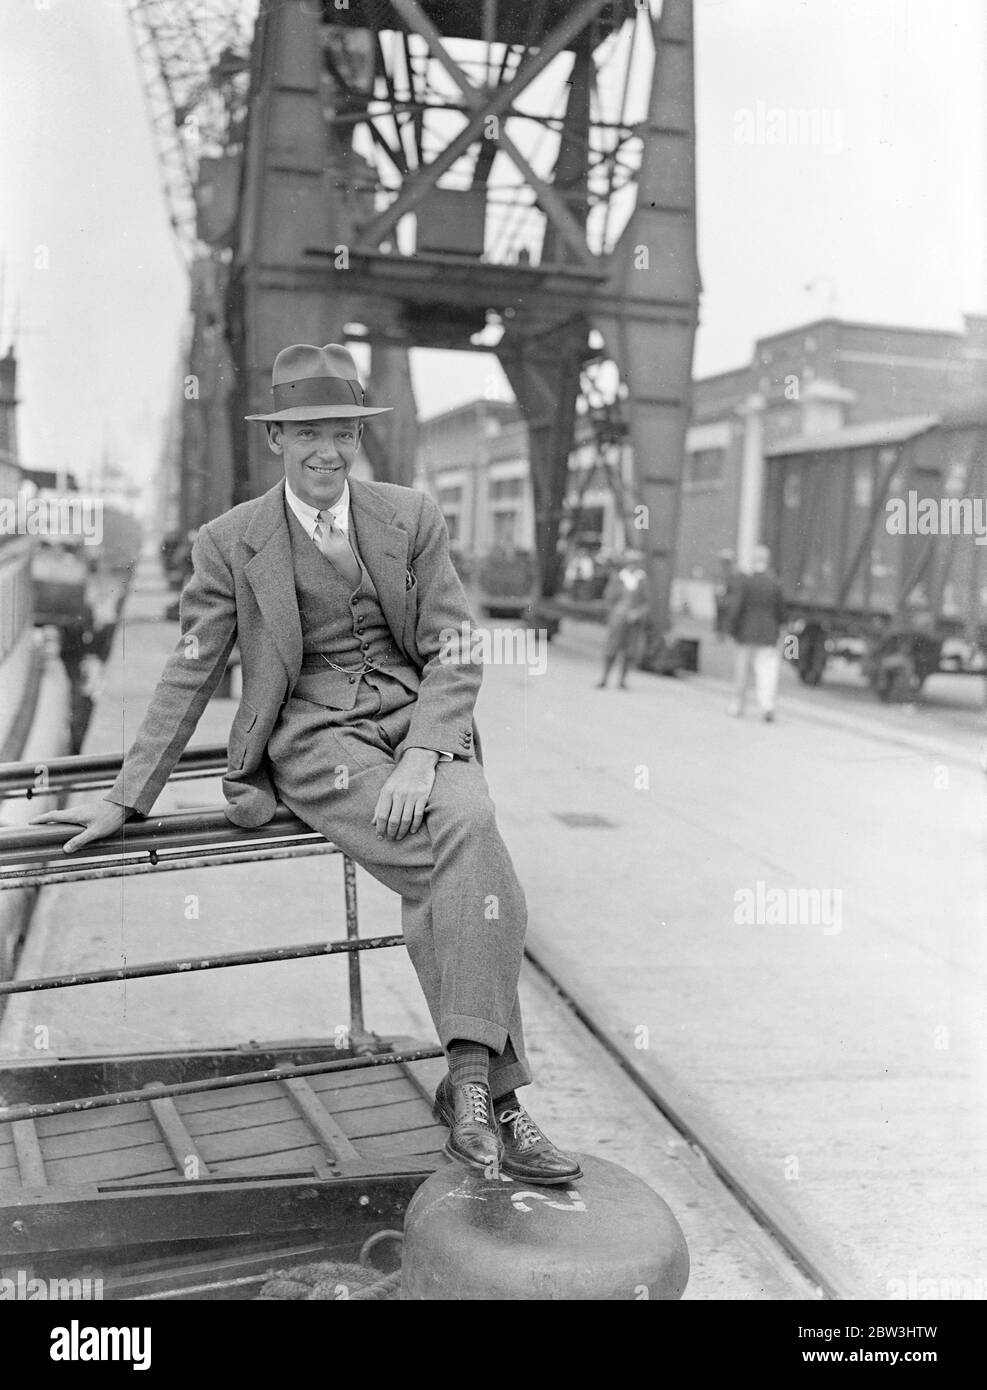 Fred Astaire Arrives In England From America . Fred Astaire , famous film dancing partener of Ginger Rogers , arrived at Southampton on the liner Normandie from America . Astaire ' s sister - formerly Adele Astaire - is Lady Charles Cavendish . Photo shows : Fred Astaire on arrival at Southampton . 10 Aug 1936 Stock Photo